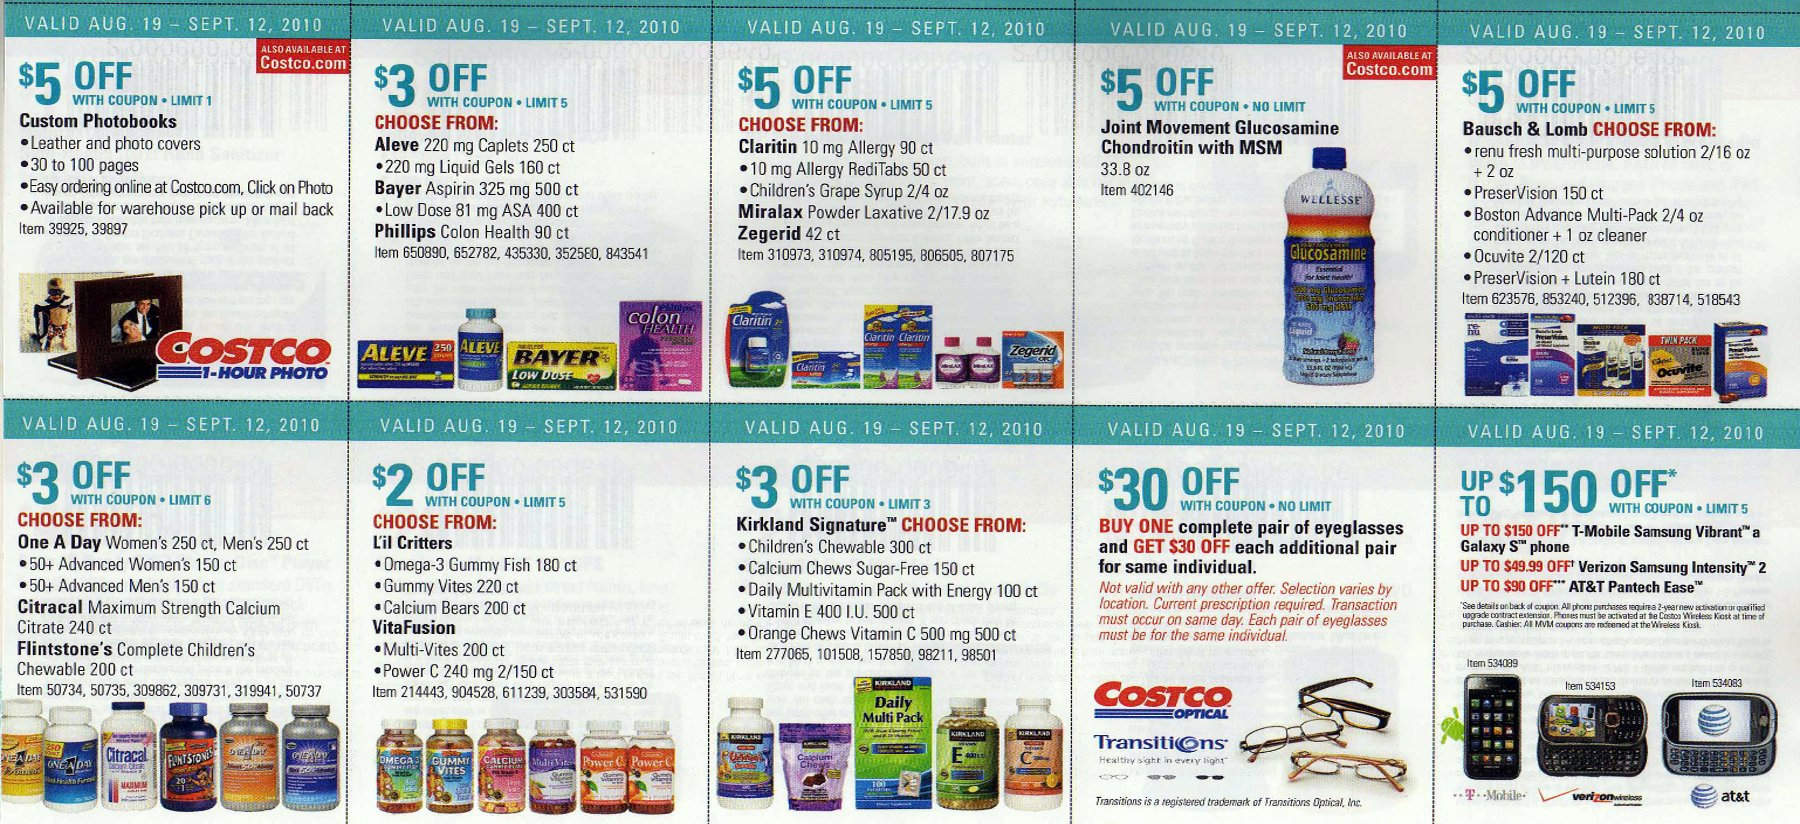 Coupon book full size page -> 7 <-